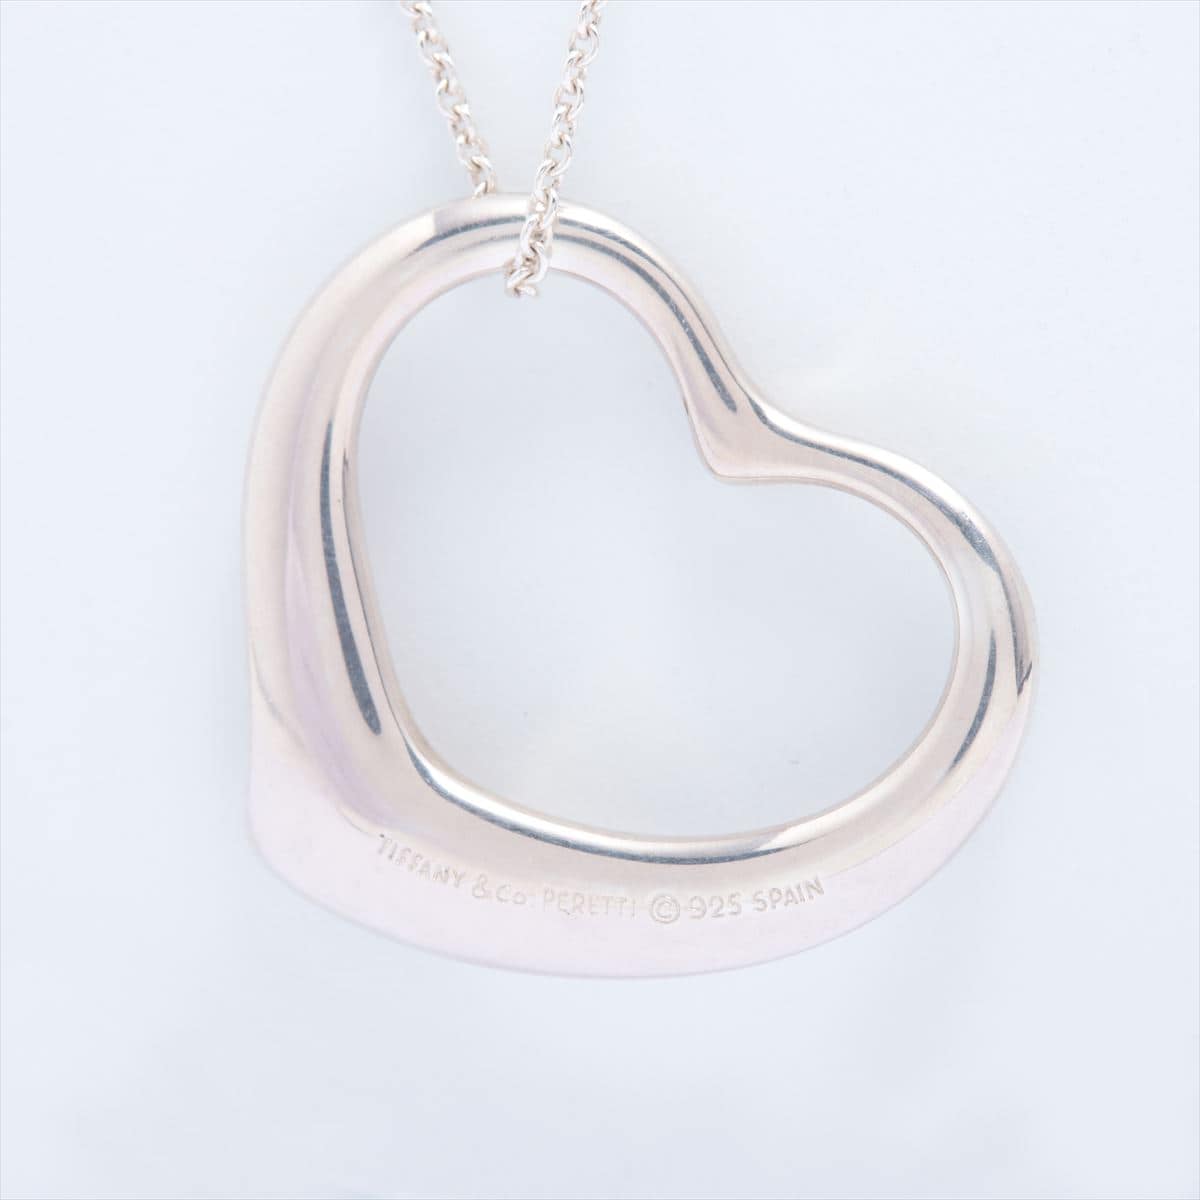 Tiffany Open Heart Necklace 925 16.4g Silver